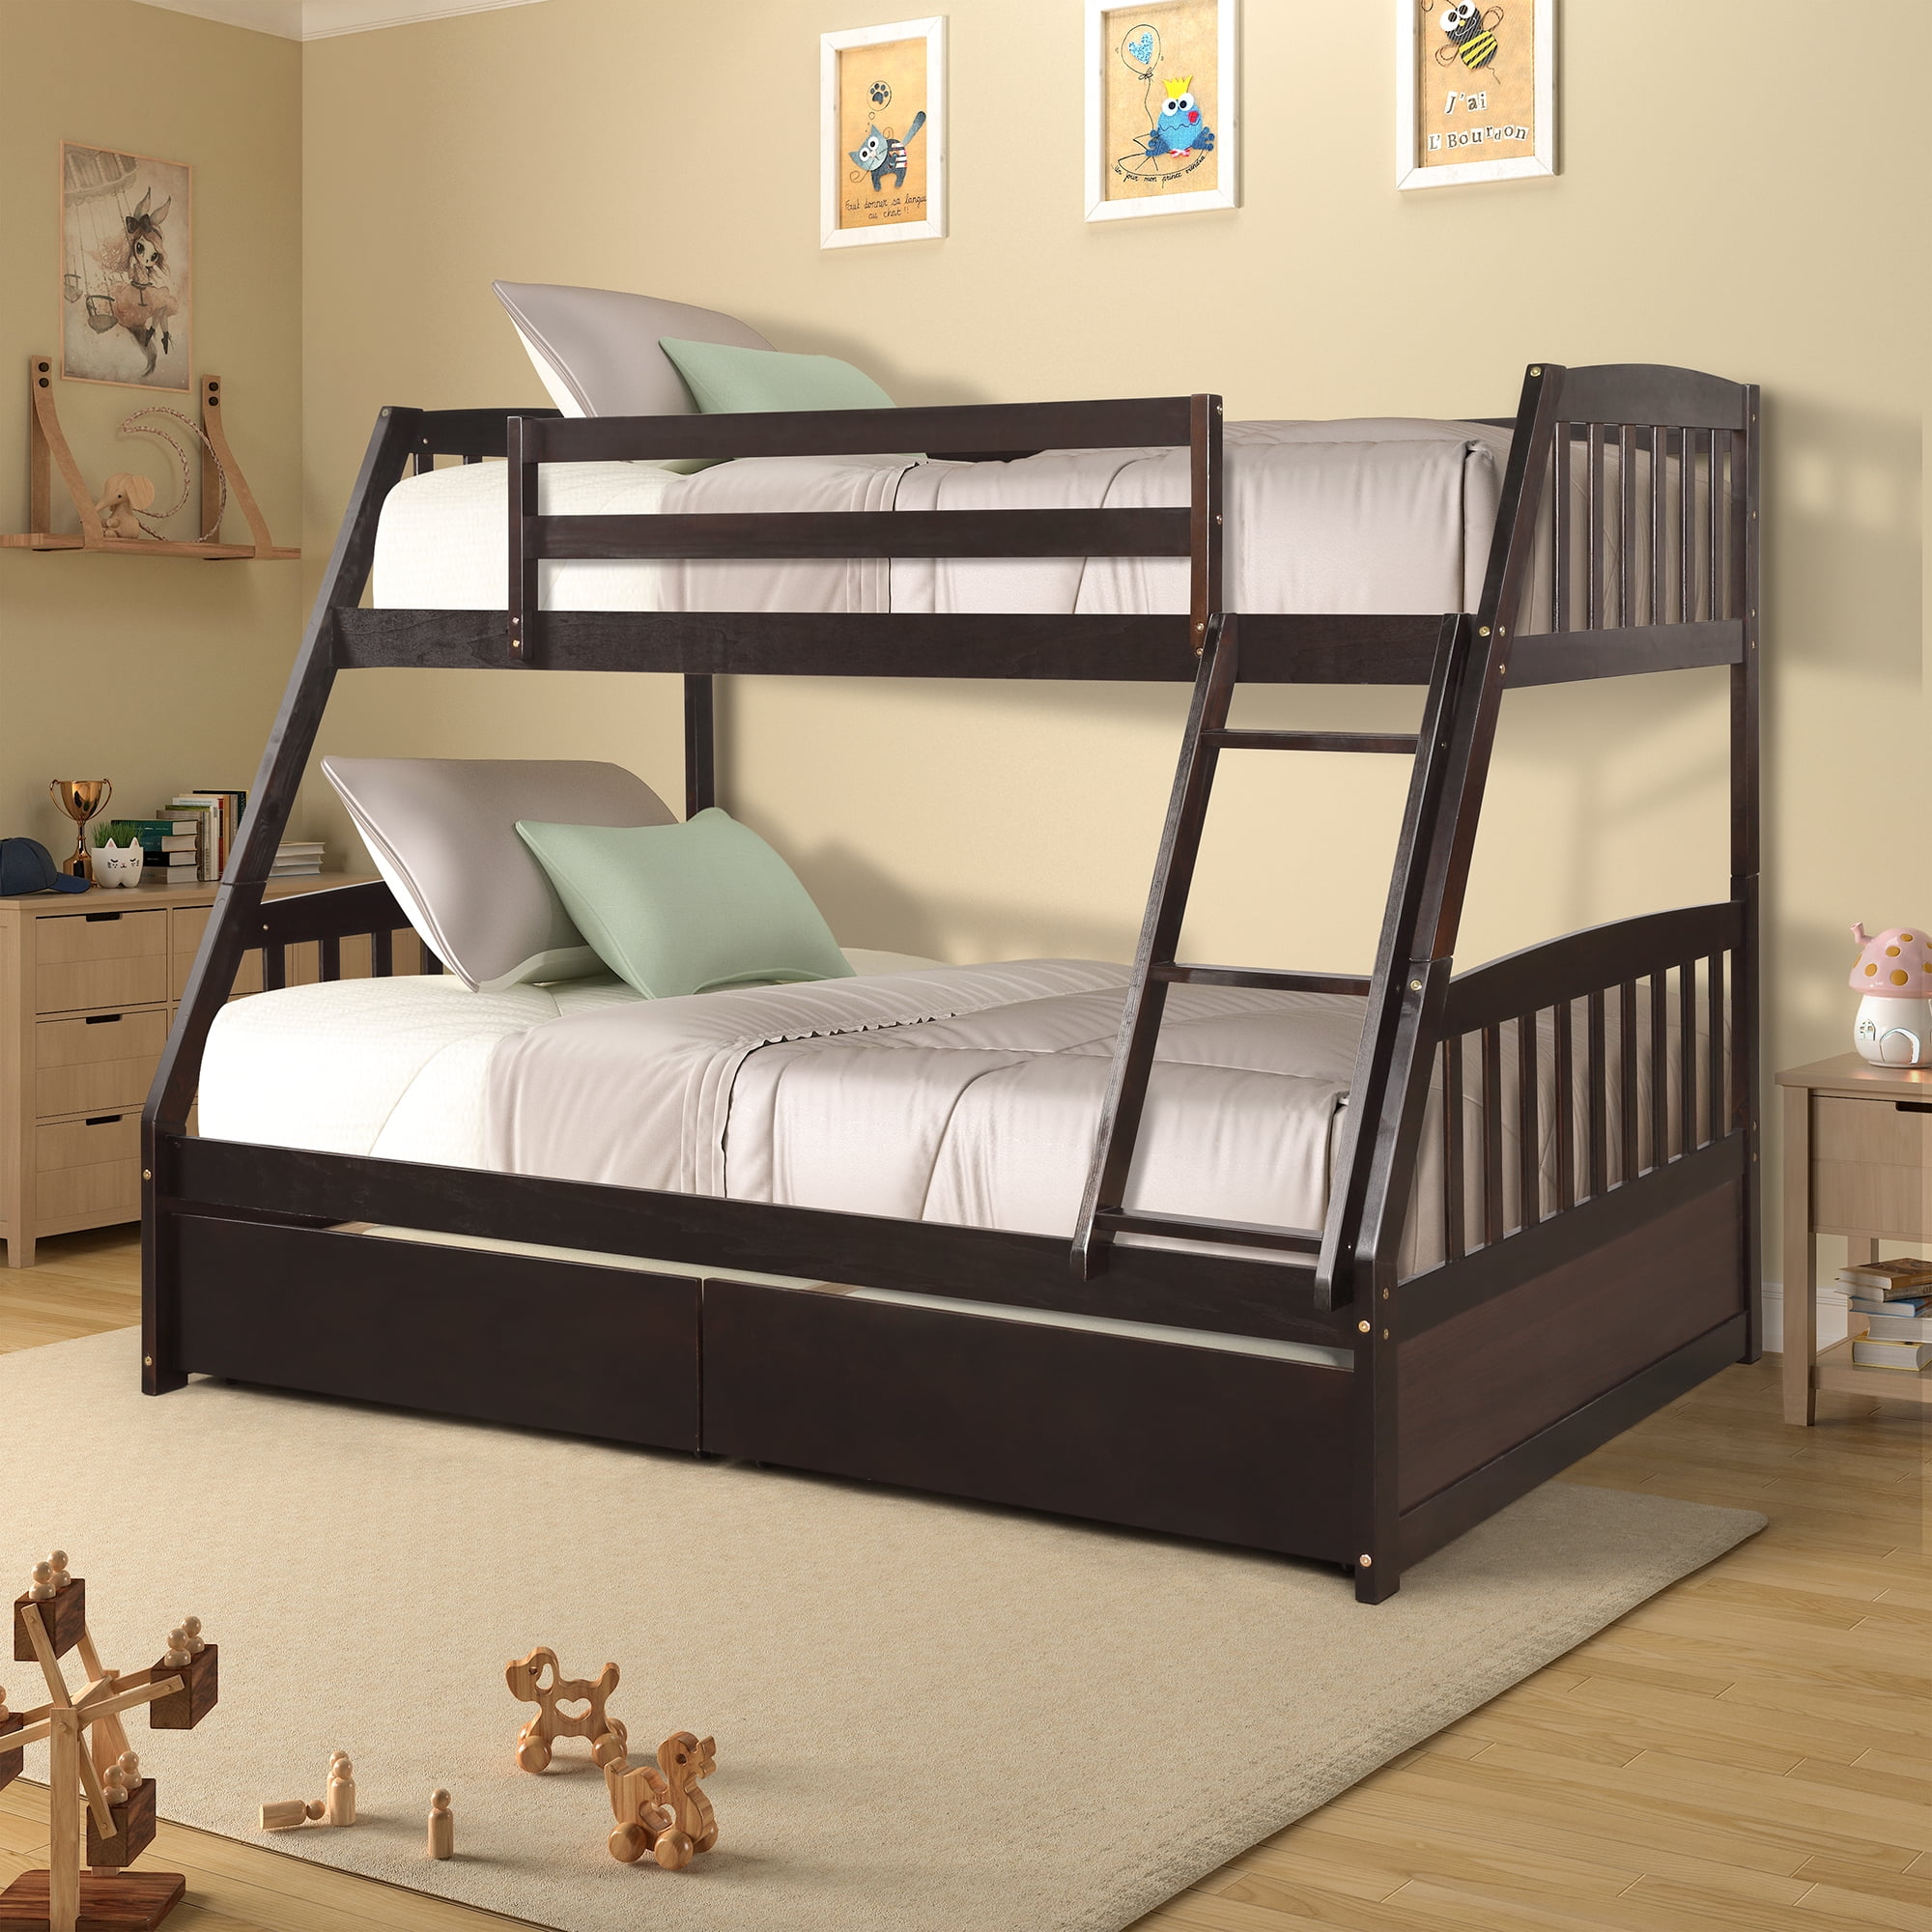 Kids Twin Over Full Bunk Beds Solid, Girls Bunk Beds With Storage